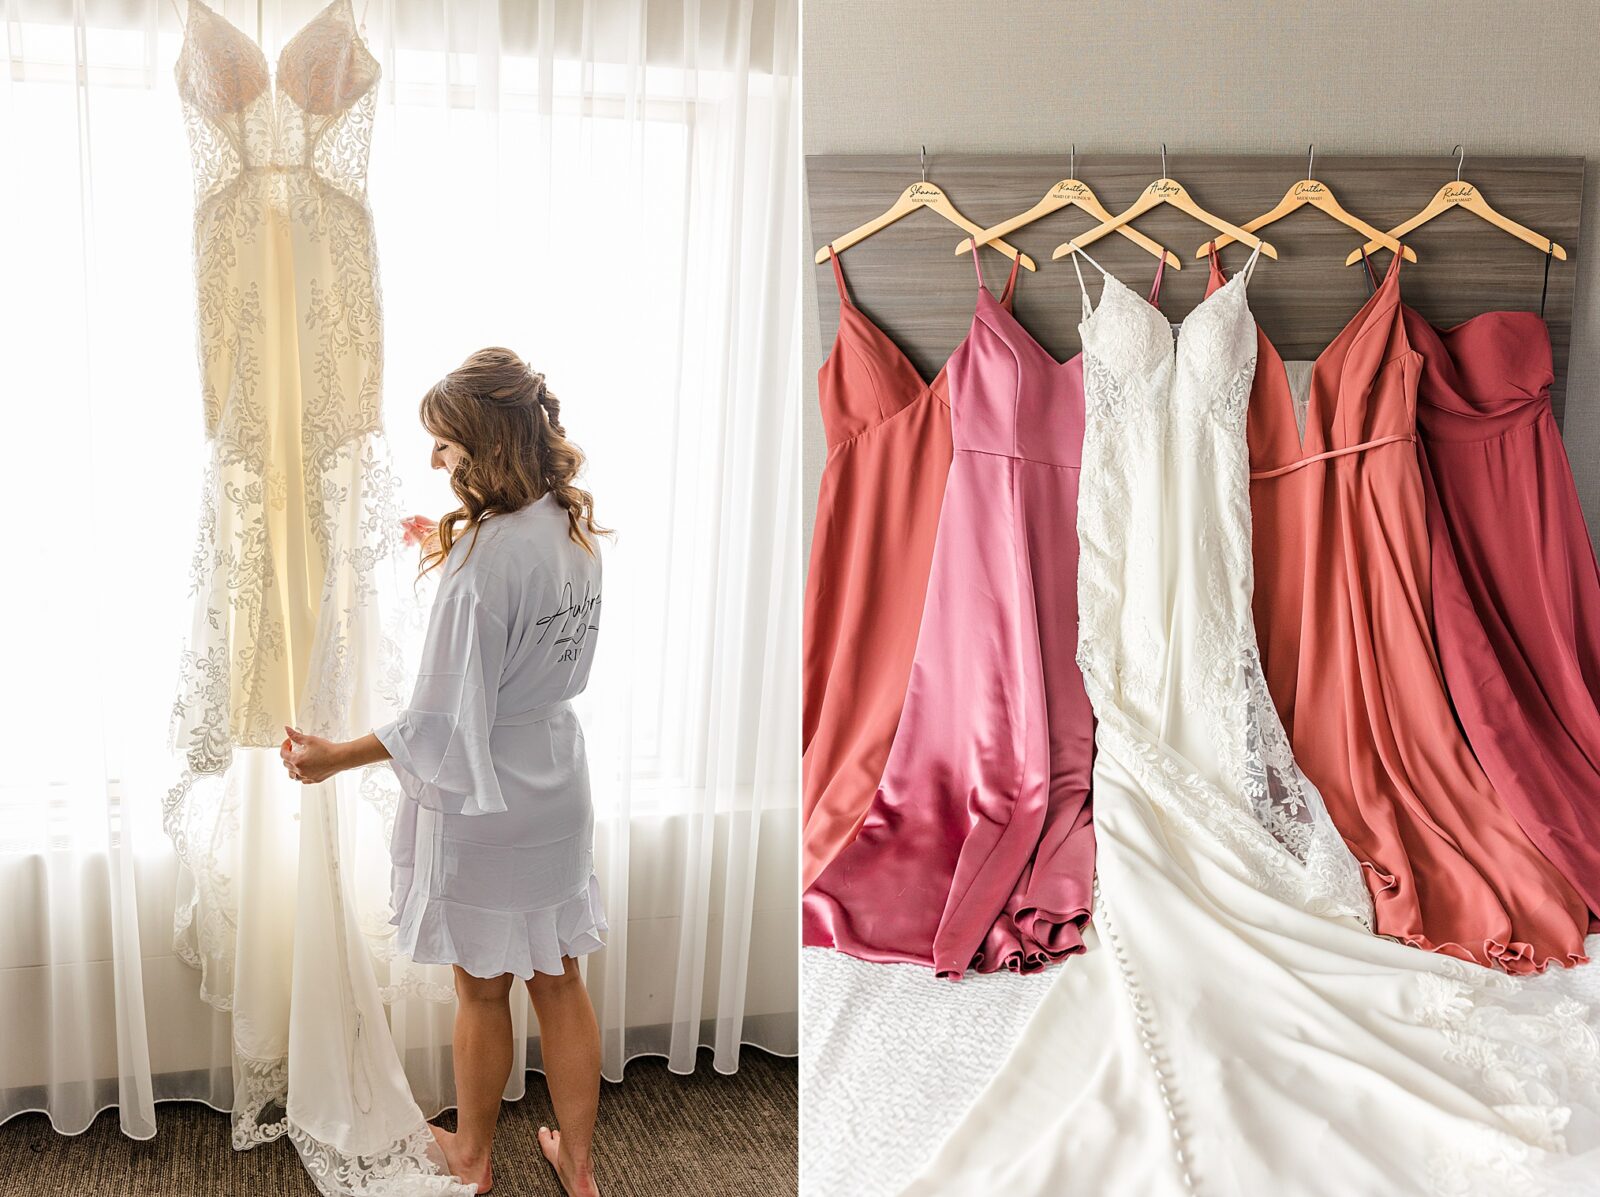 bride with her wedding dress, and bridesmaid dresses